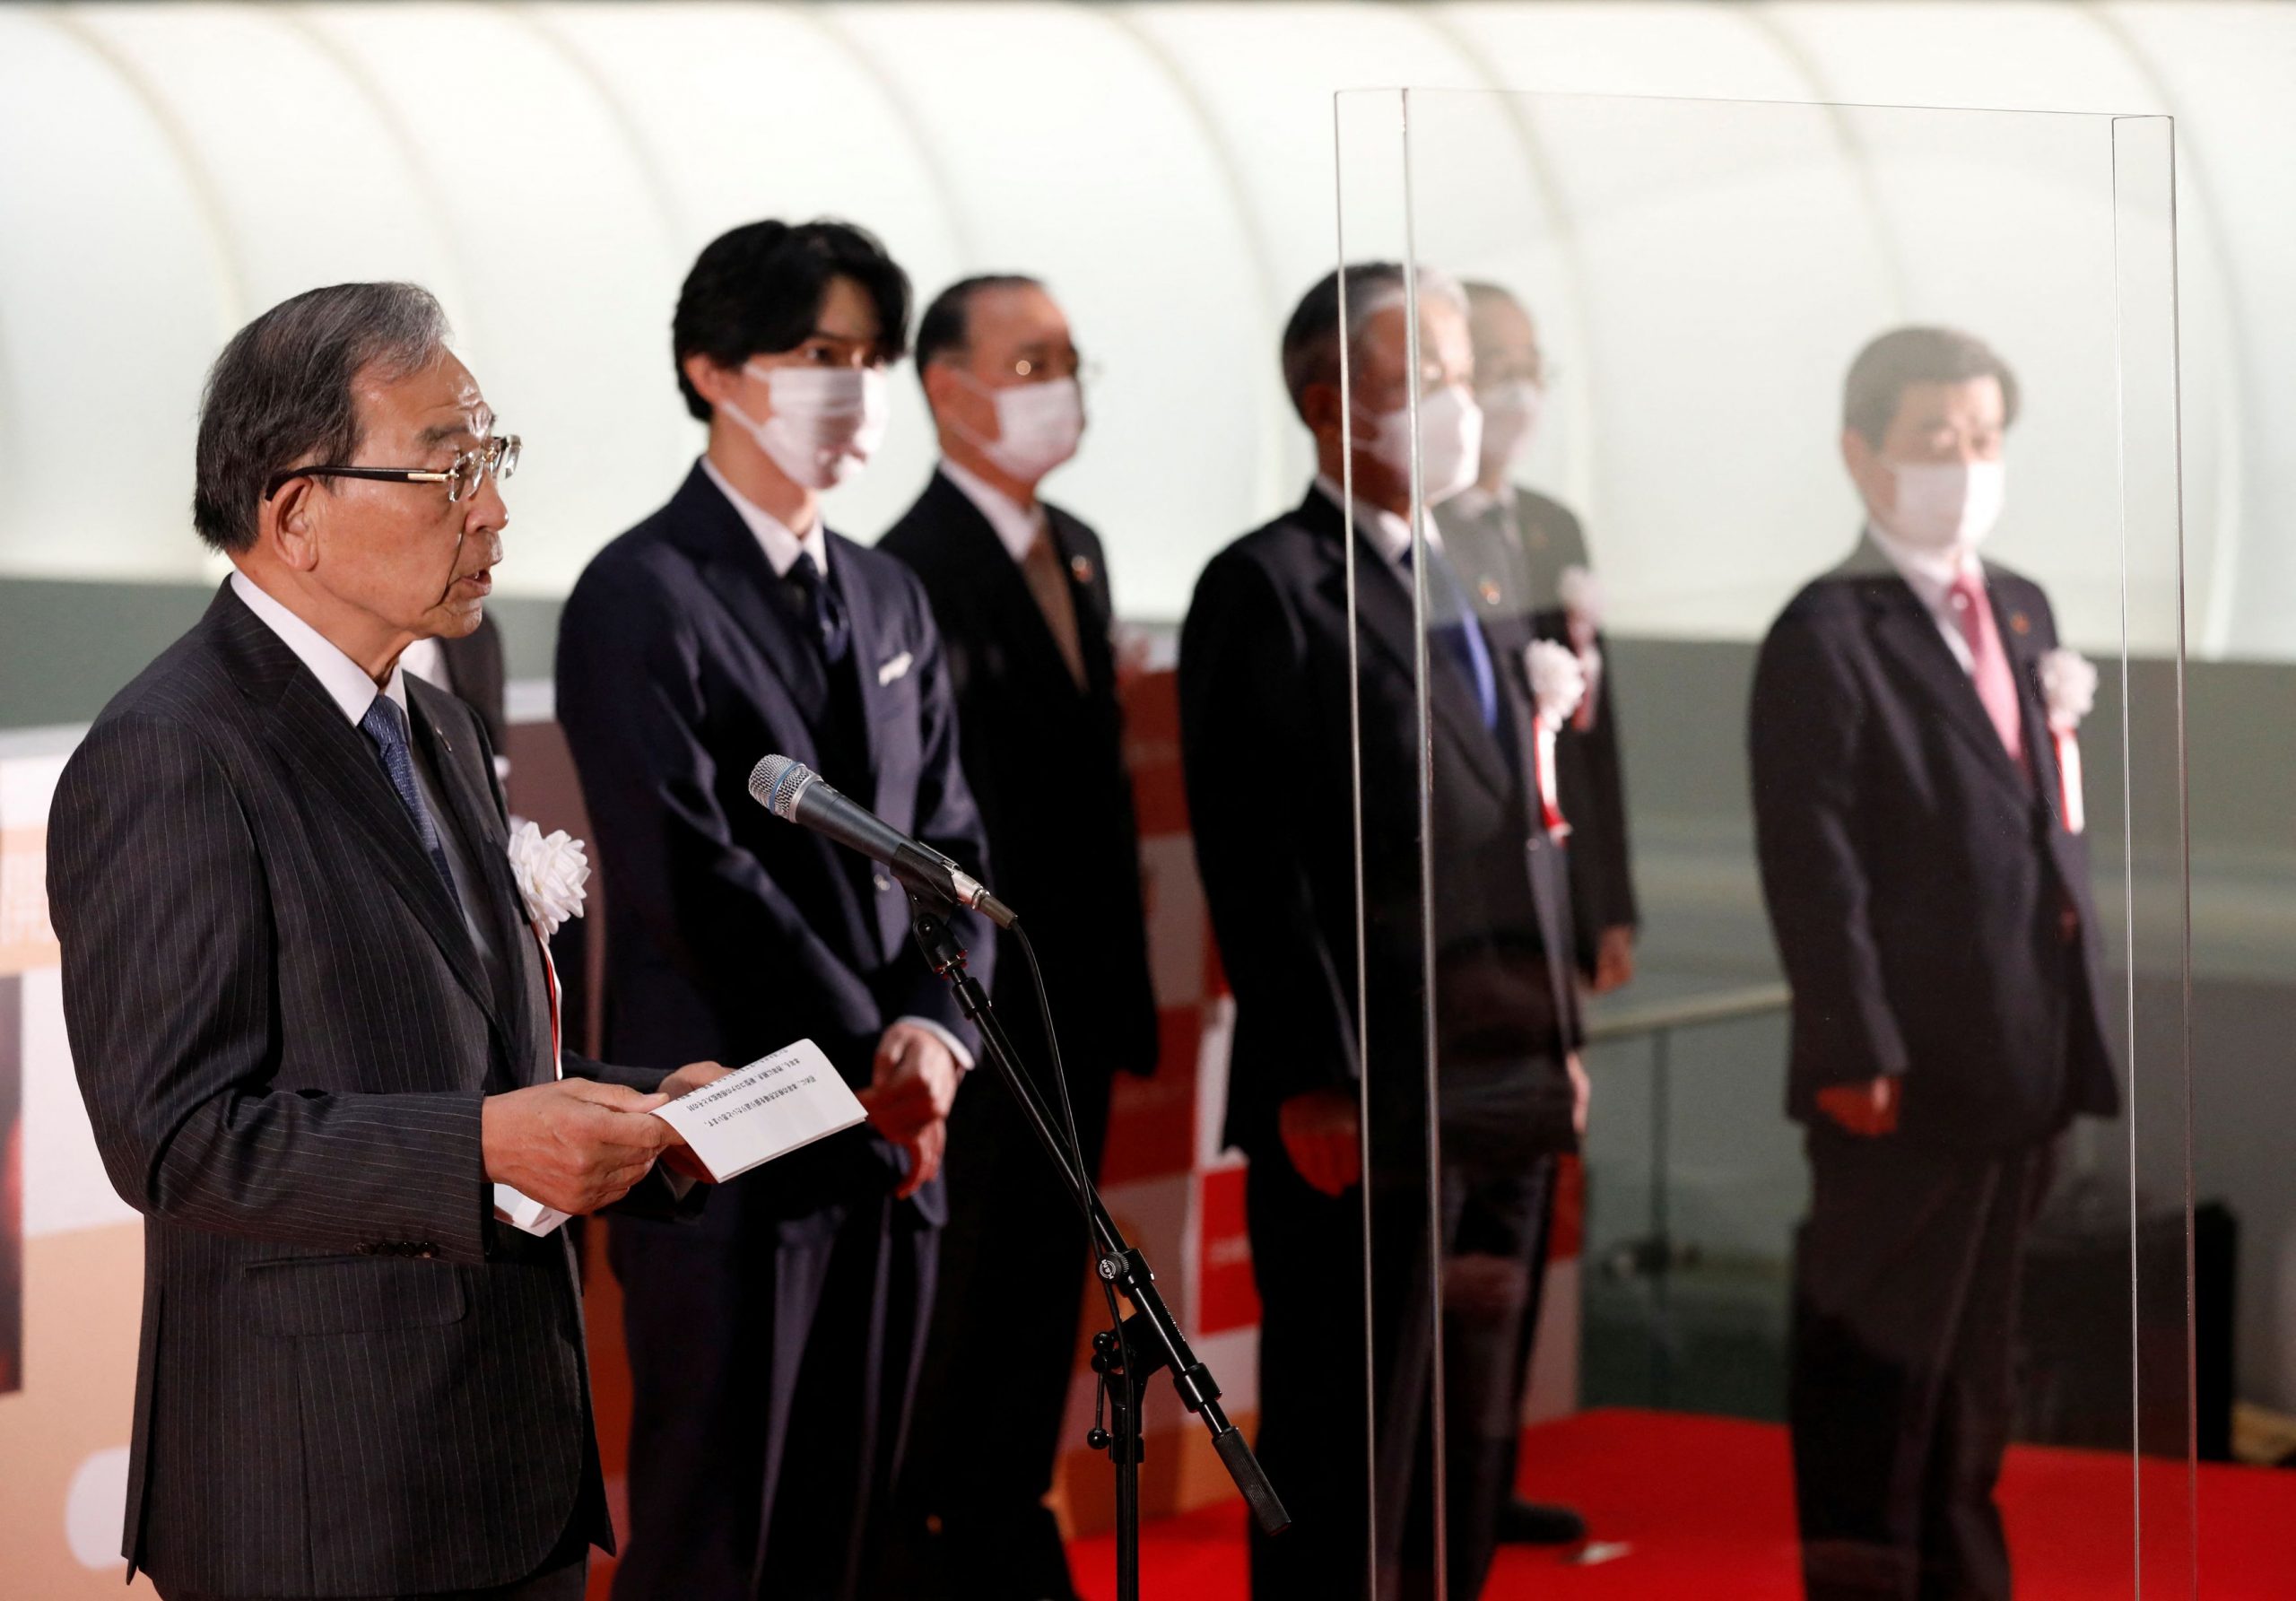 Ceremony marking the end of trading in 2021 at the Tokyo Stock Exchange (TSE) in Tokyo